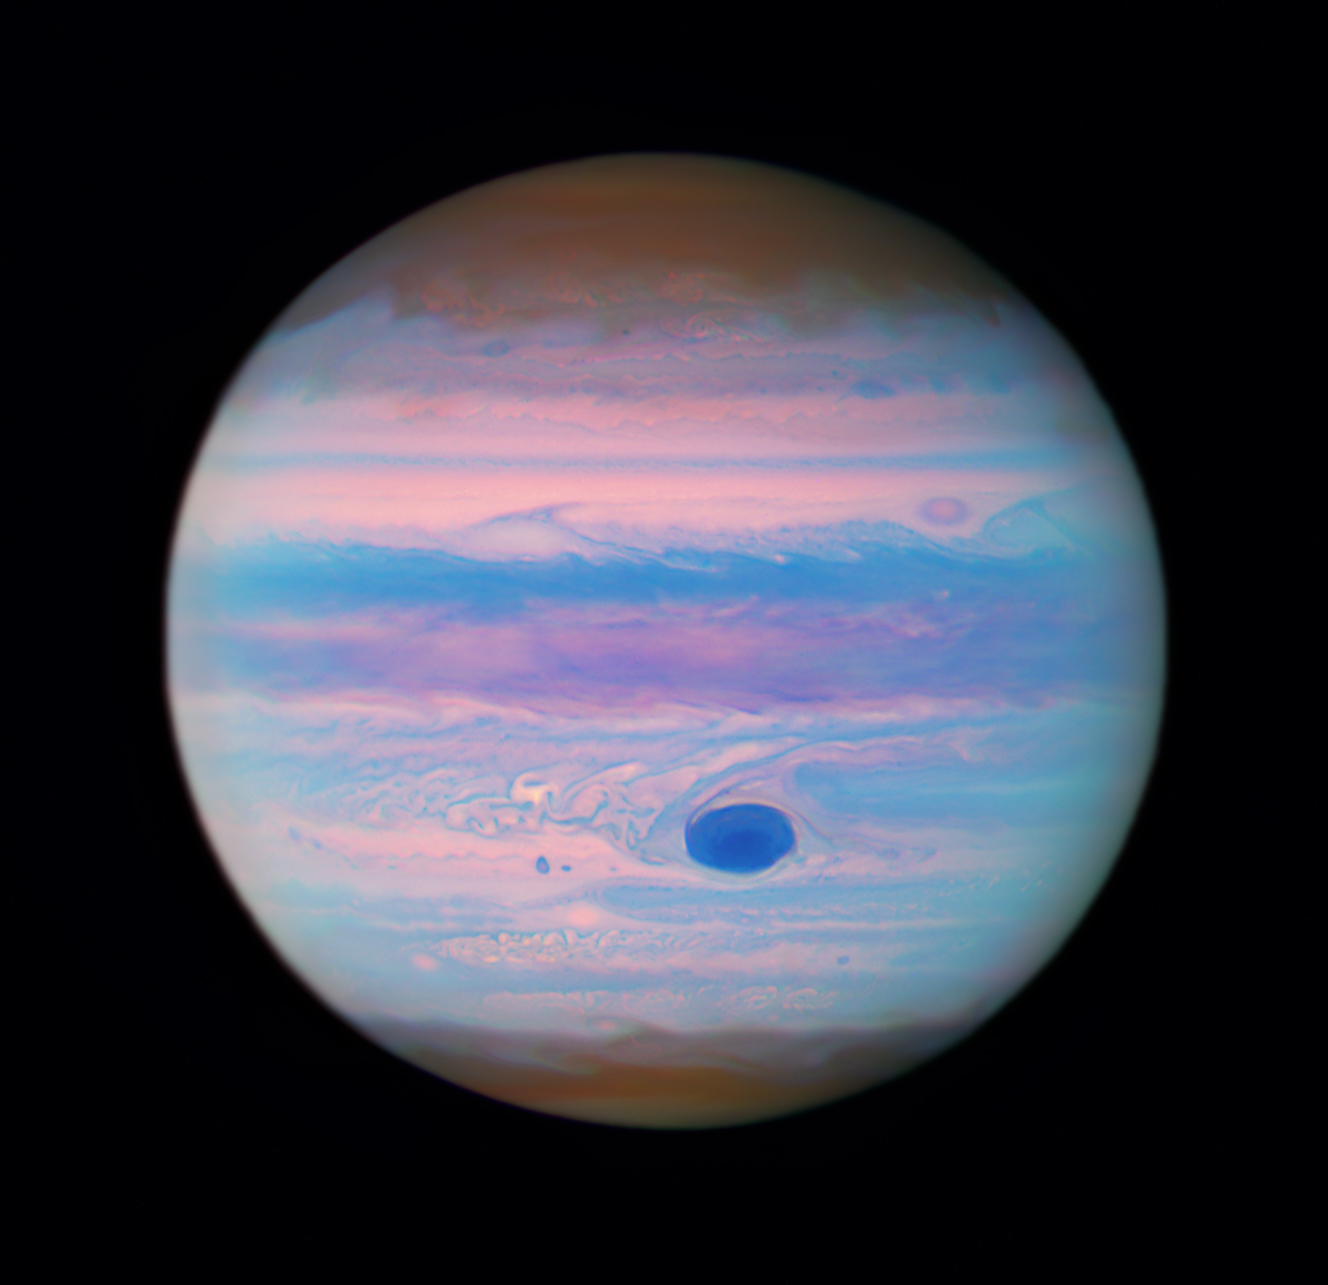 The planet Jupiter with its familiar cloud bands seen in shades of pink, rusty red, blue, and purple. The Great Red Spot is a deep navy blue, surrounded by bands and swirls of pink, and light blue.